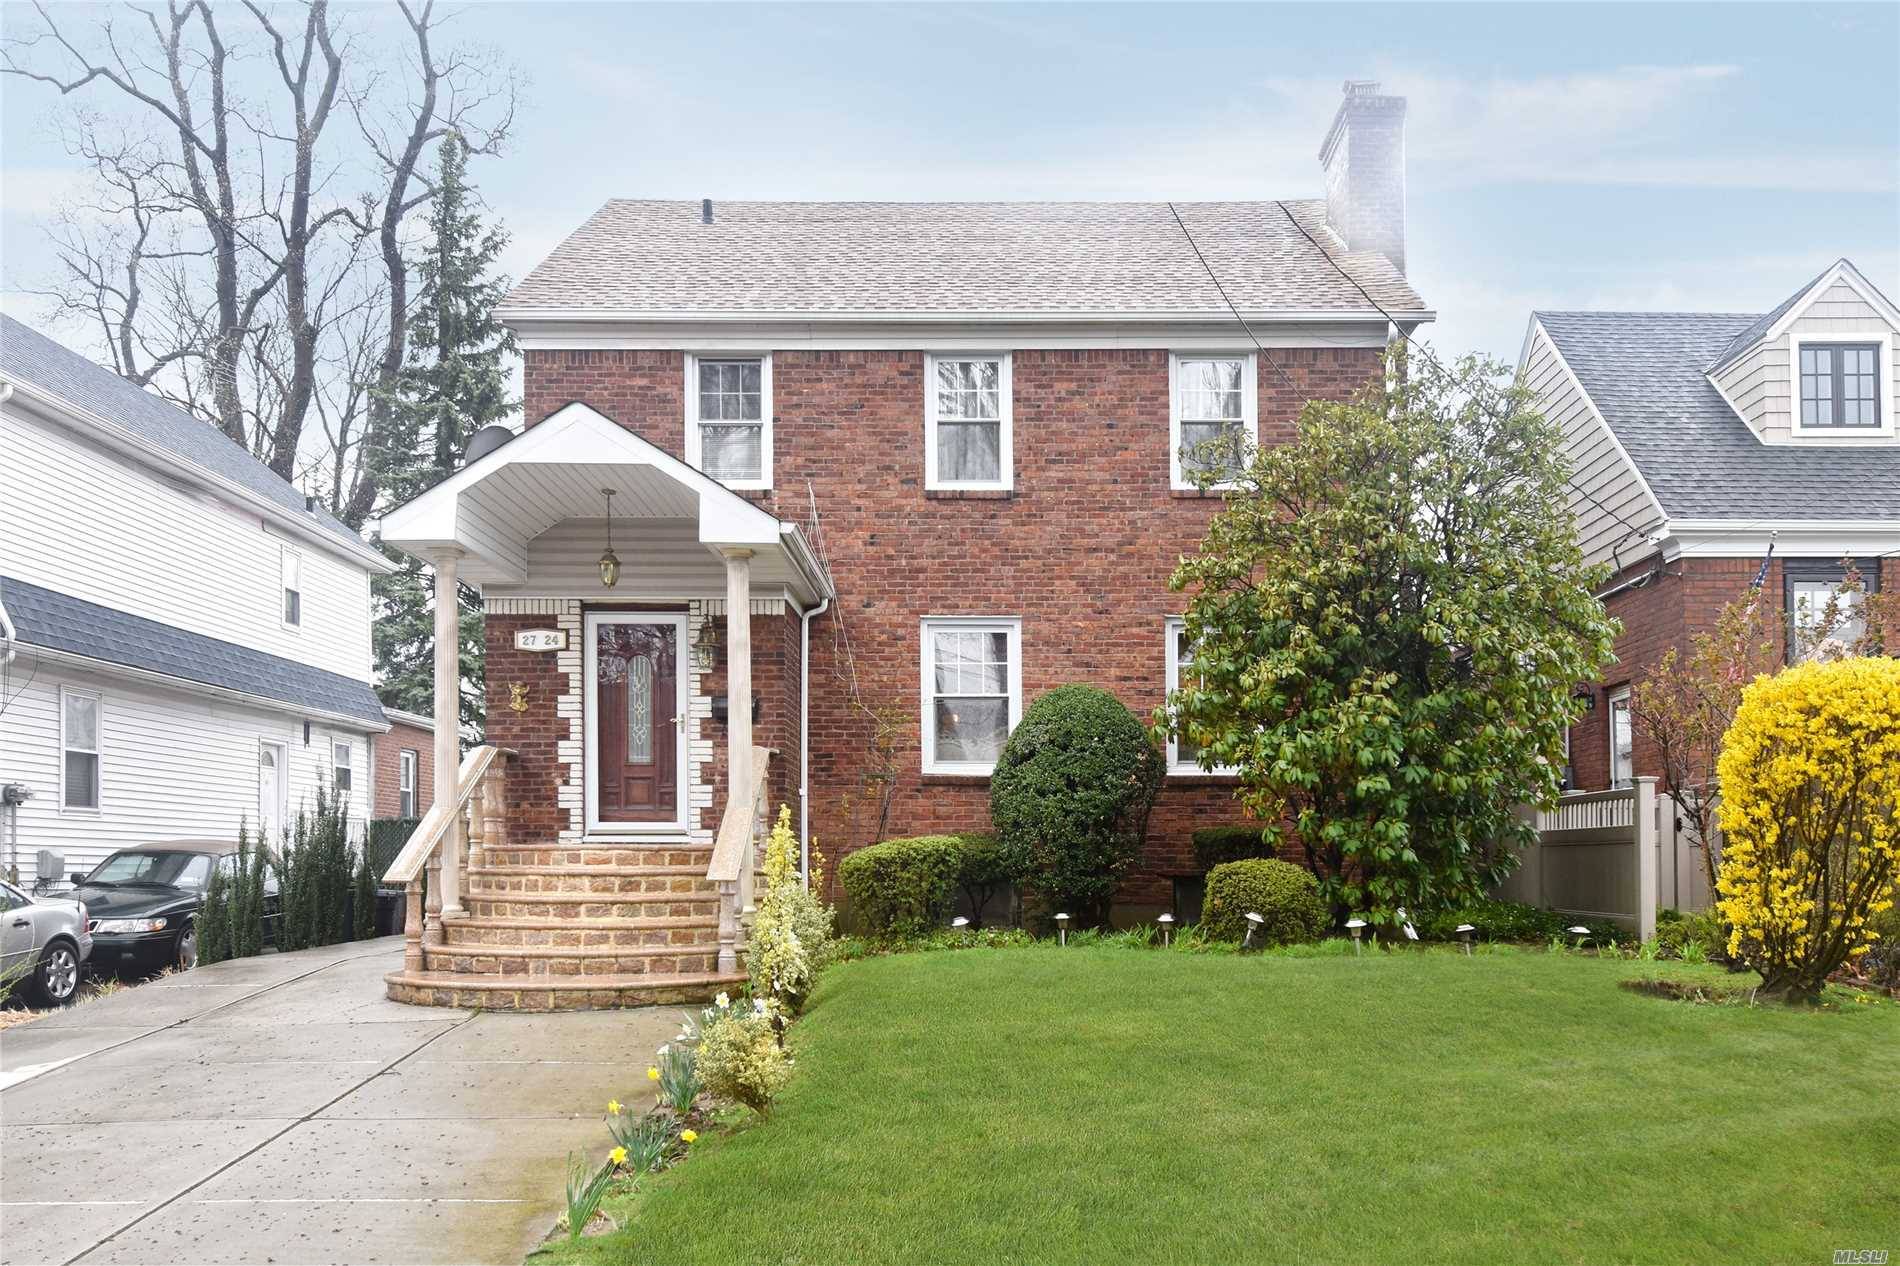 Beautiful Detached Colonial In Excellent Condition With 3 Bedrooms, 2 1/2 Baths And Many Extras!